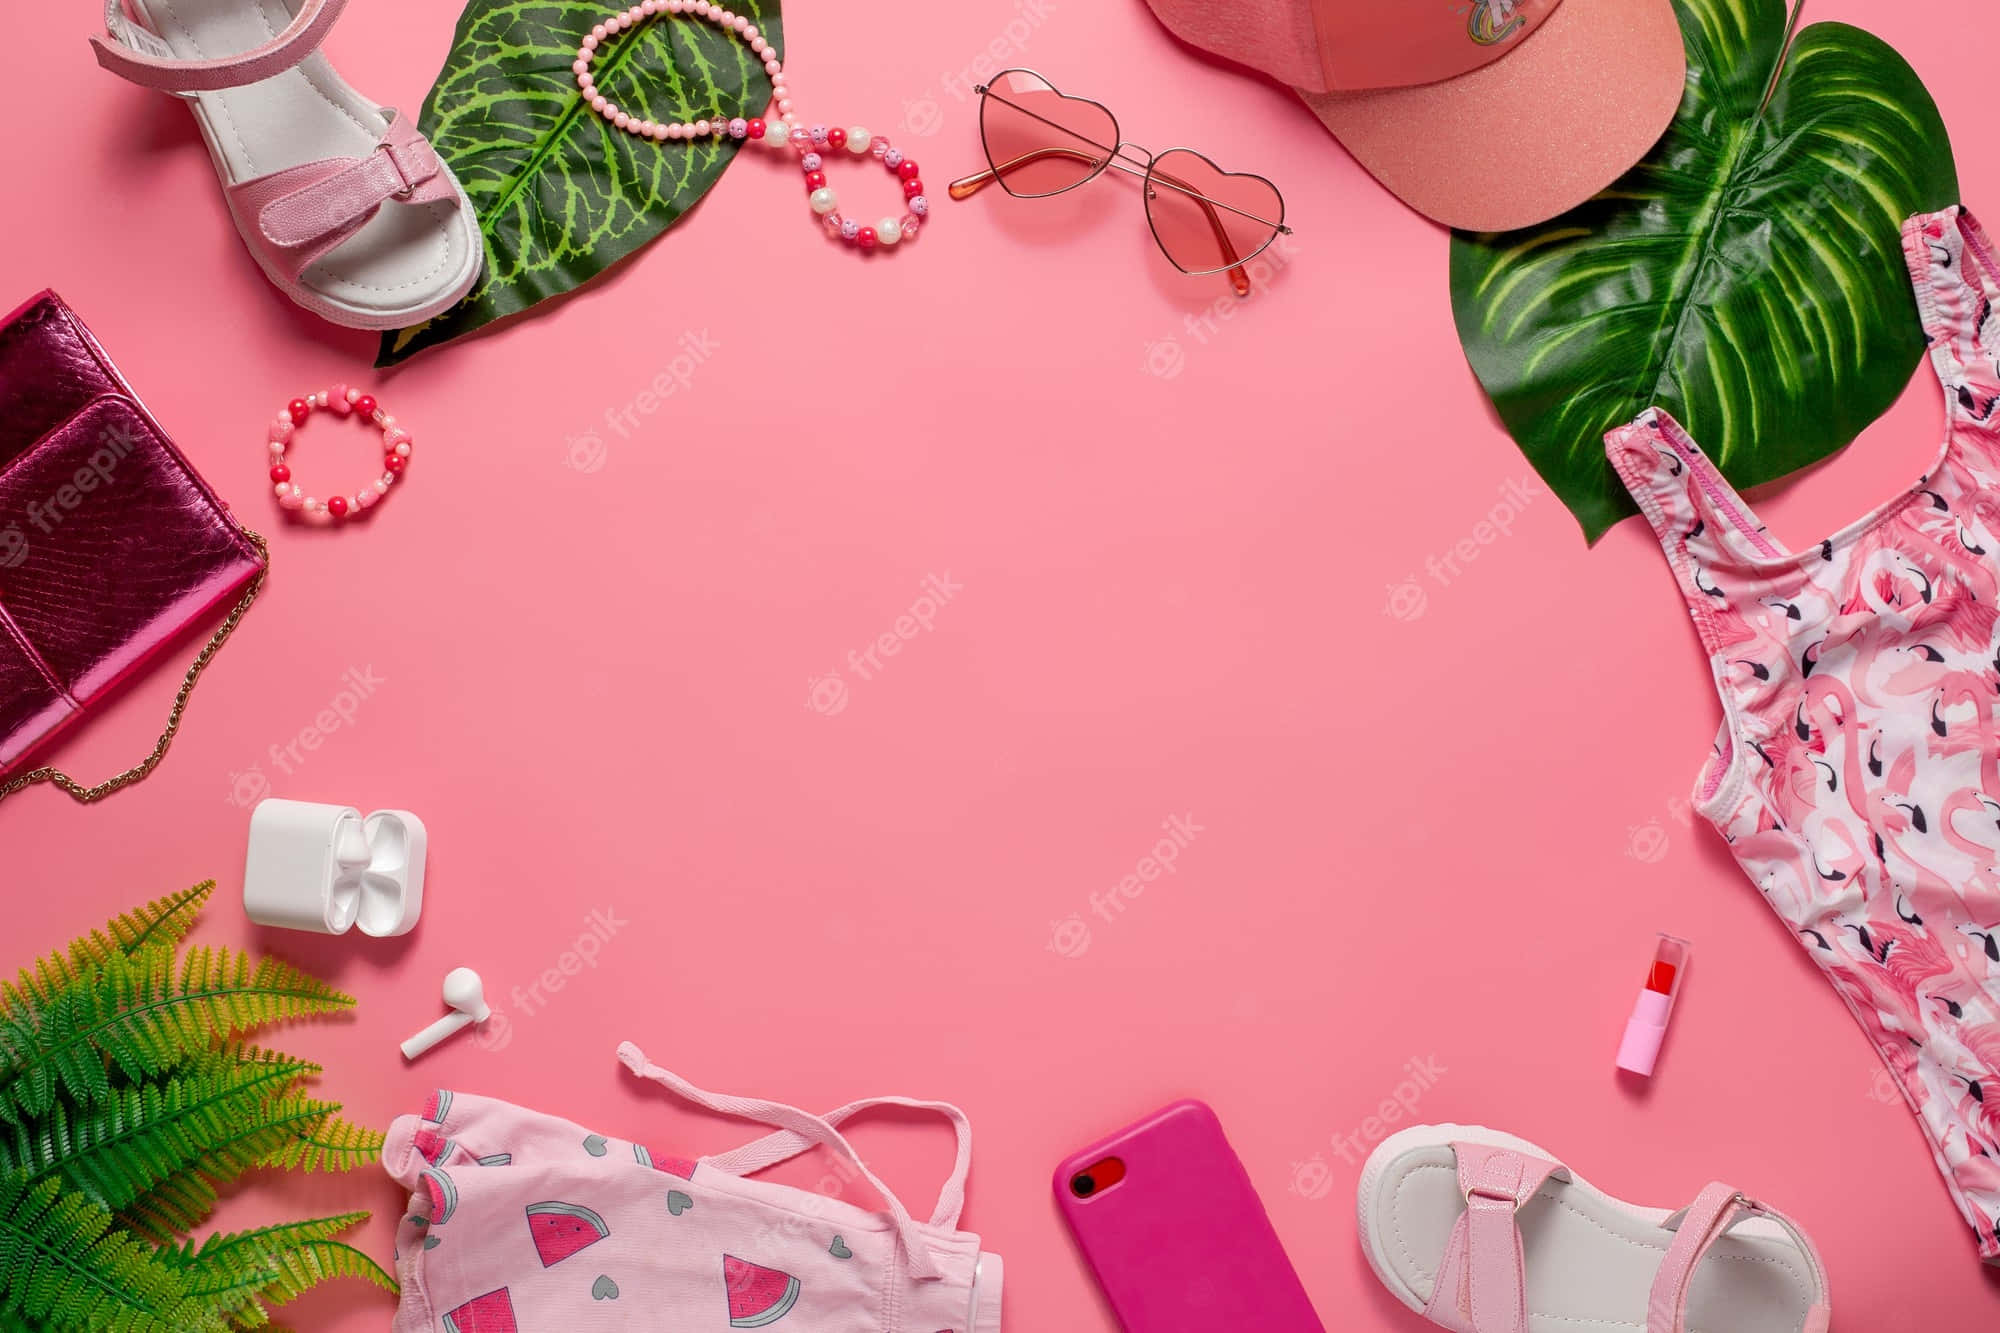 Pink Summer Clothes, Accessories, And Plants On Pink Background